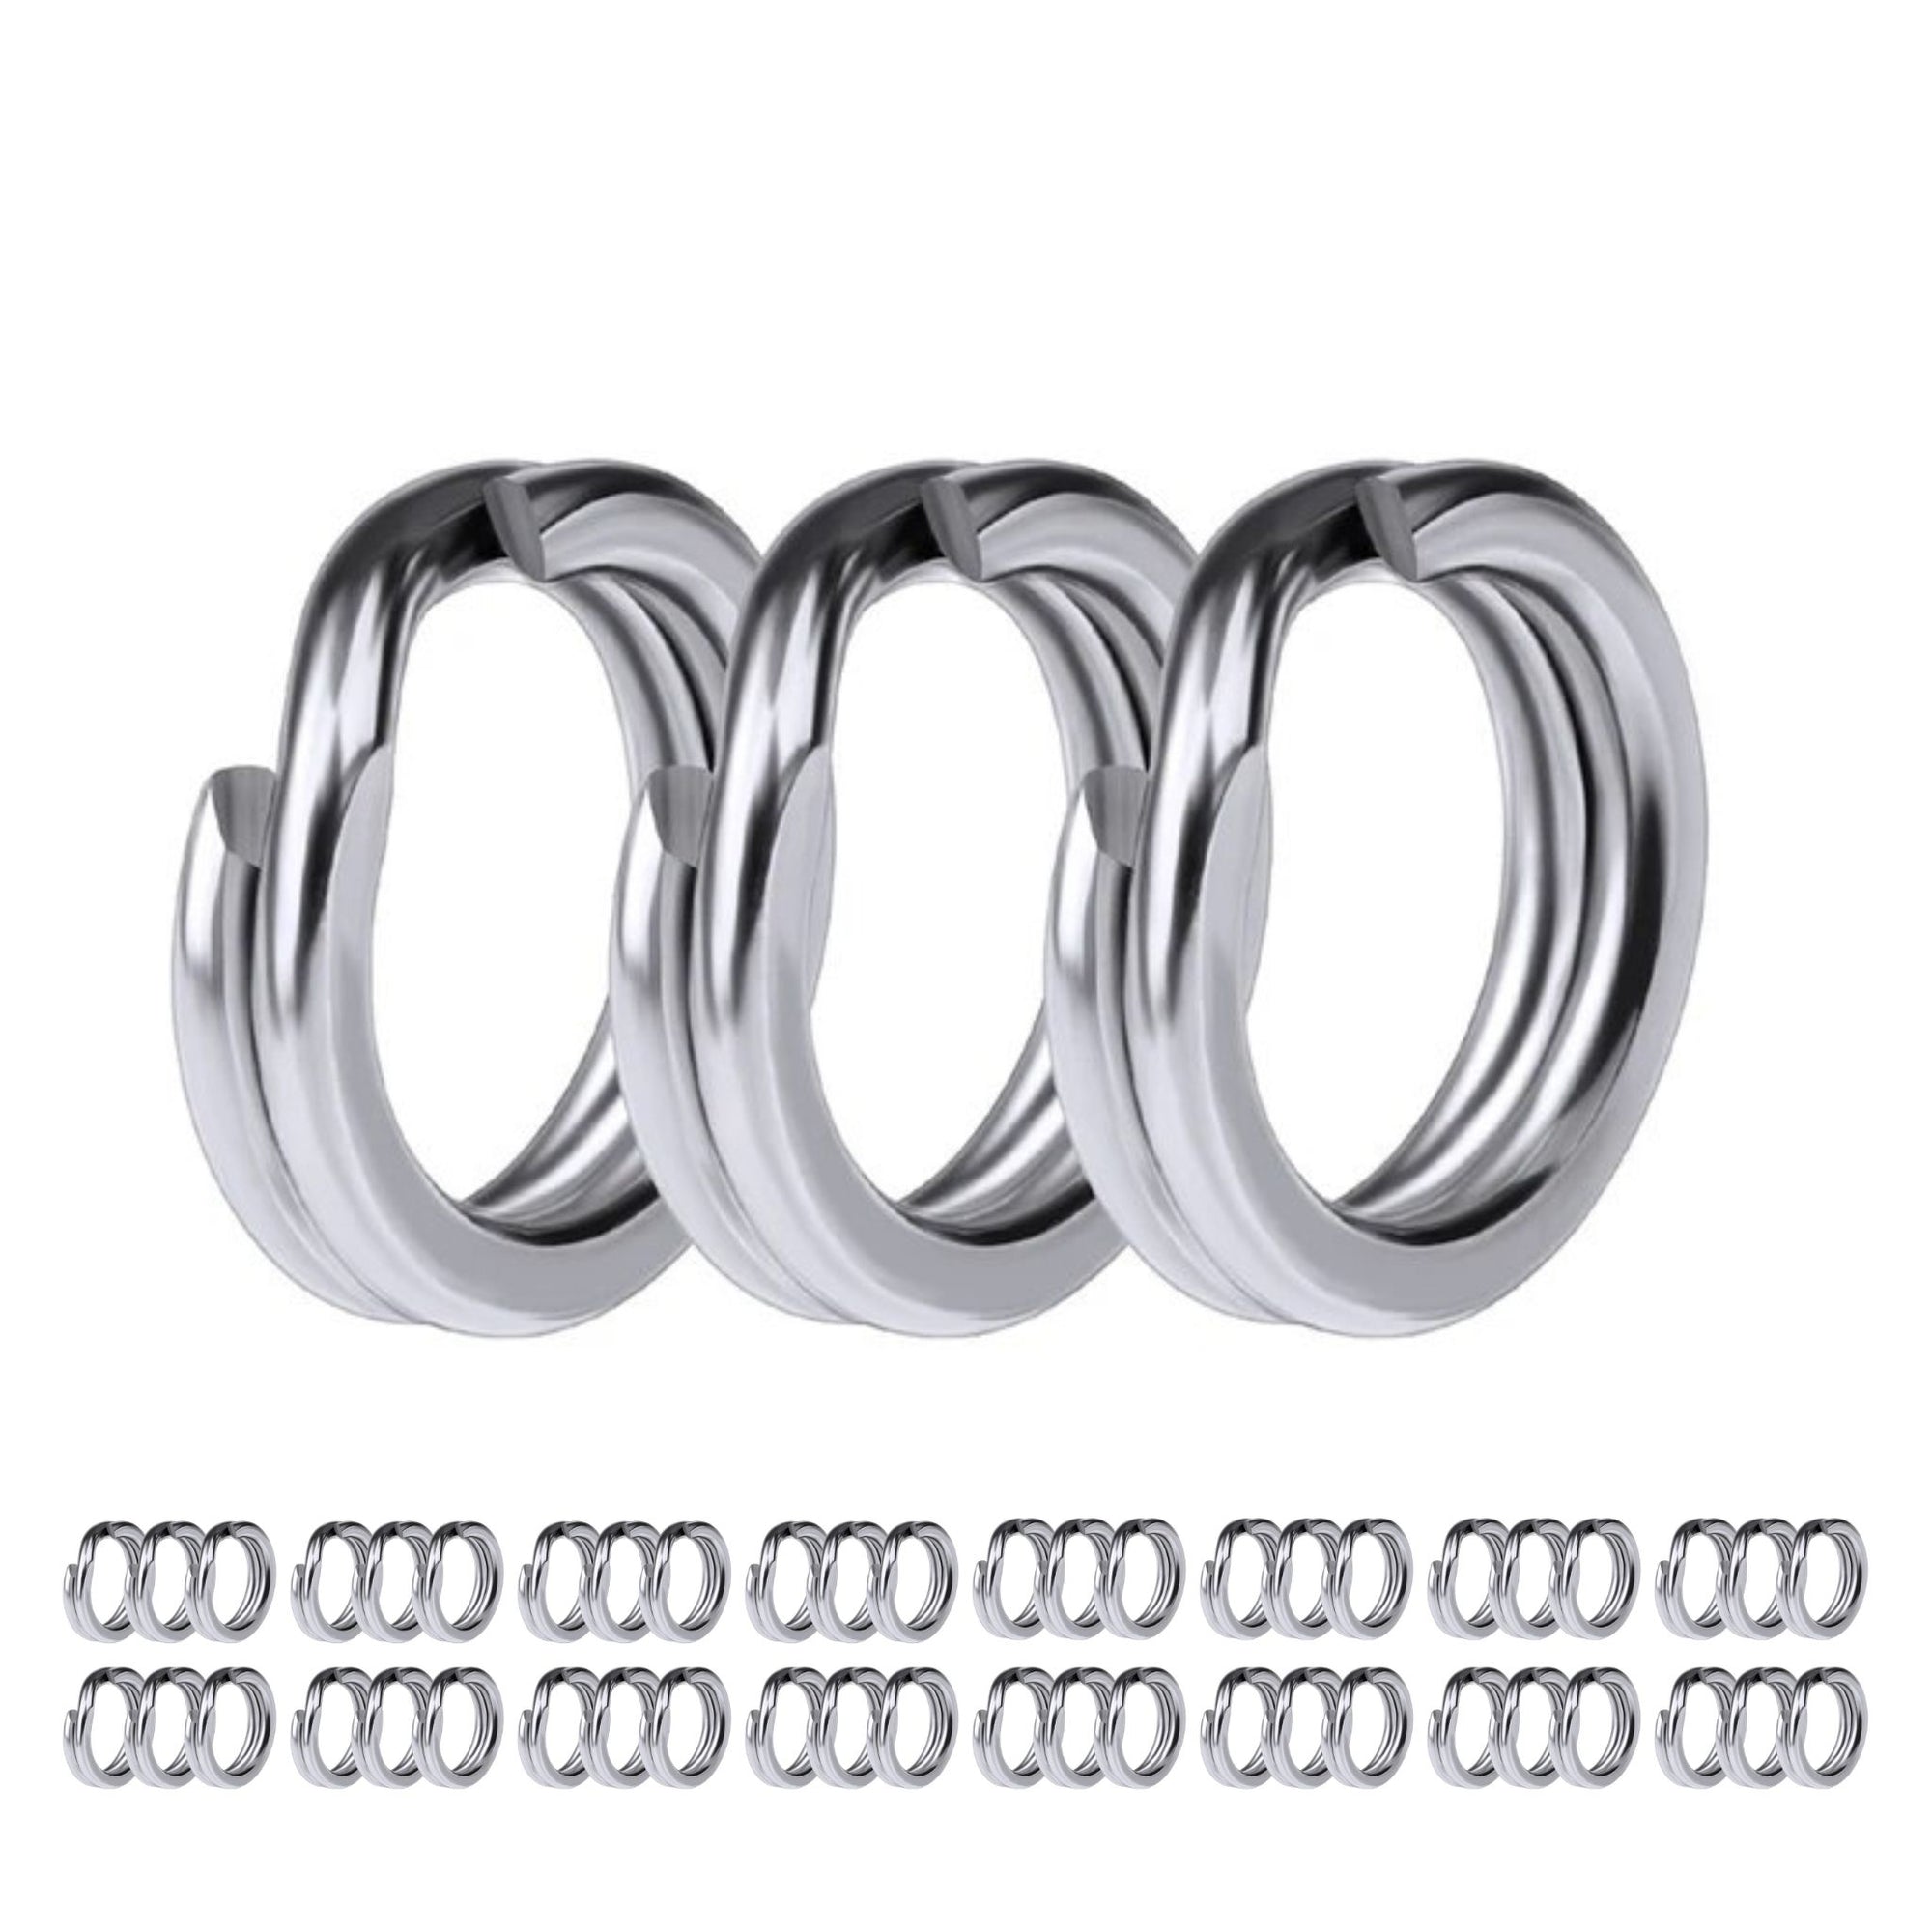 Fishing Split Ring | 12mm | Size 12 | Pack of 50 - South East Clearance Centre